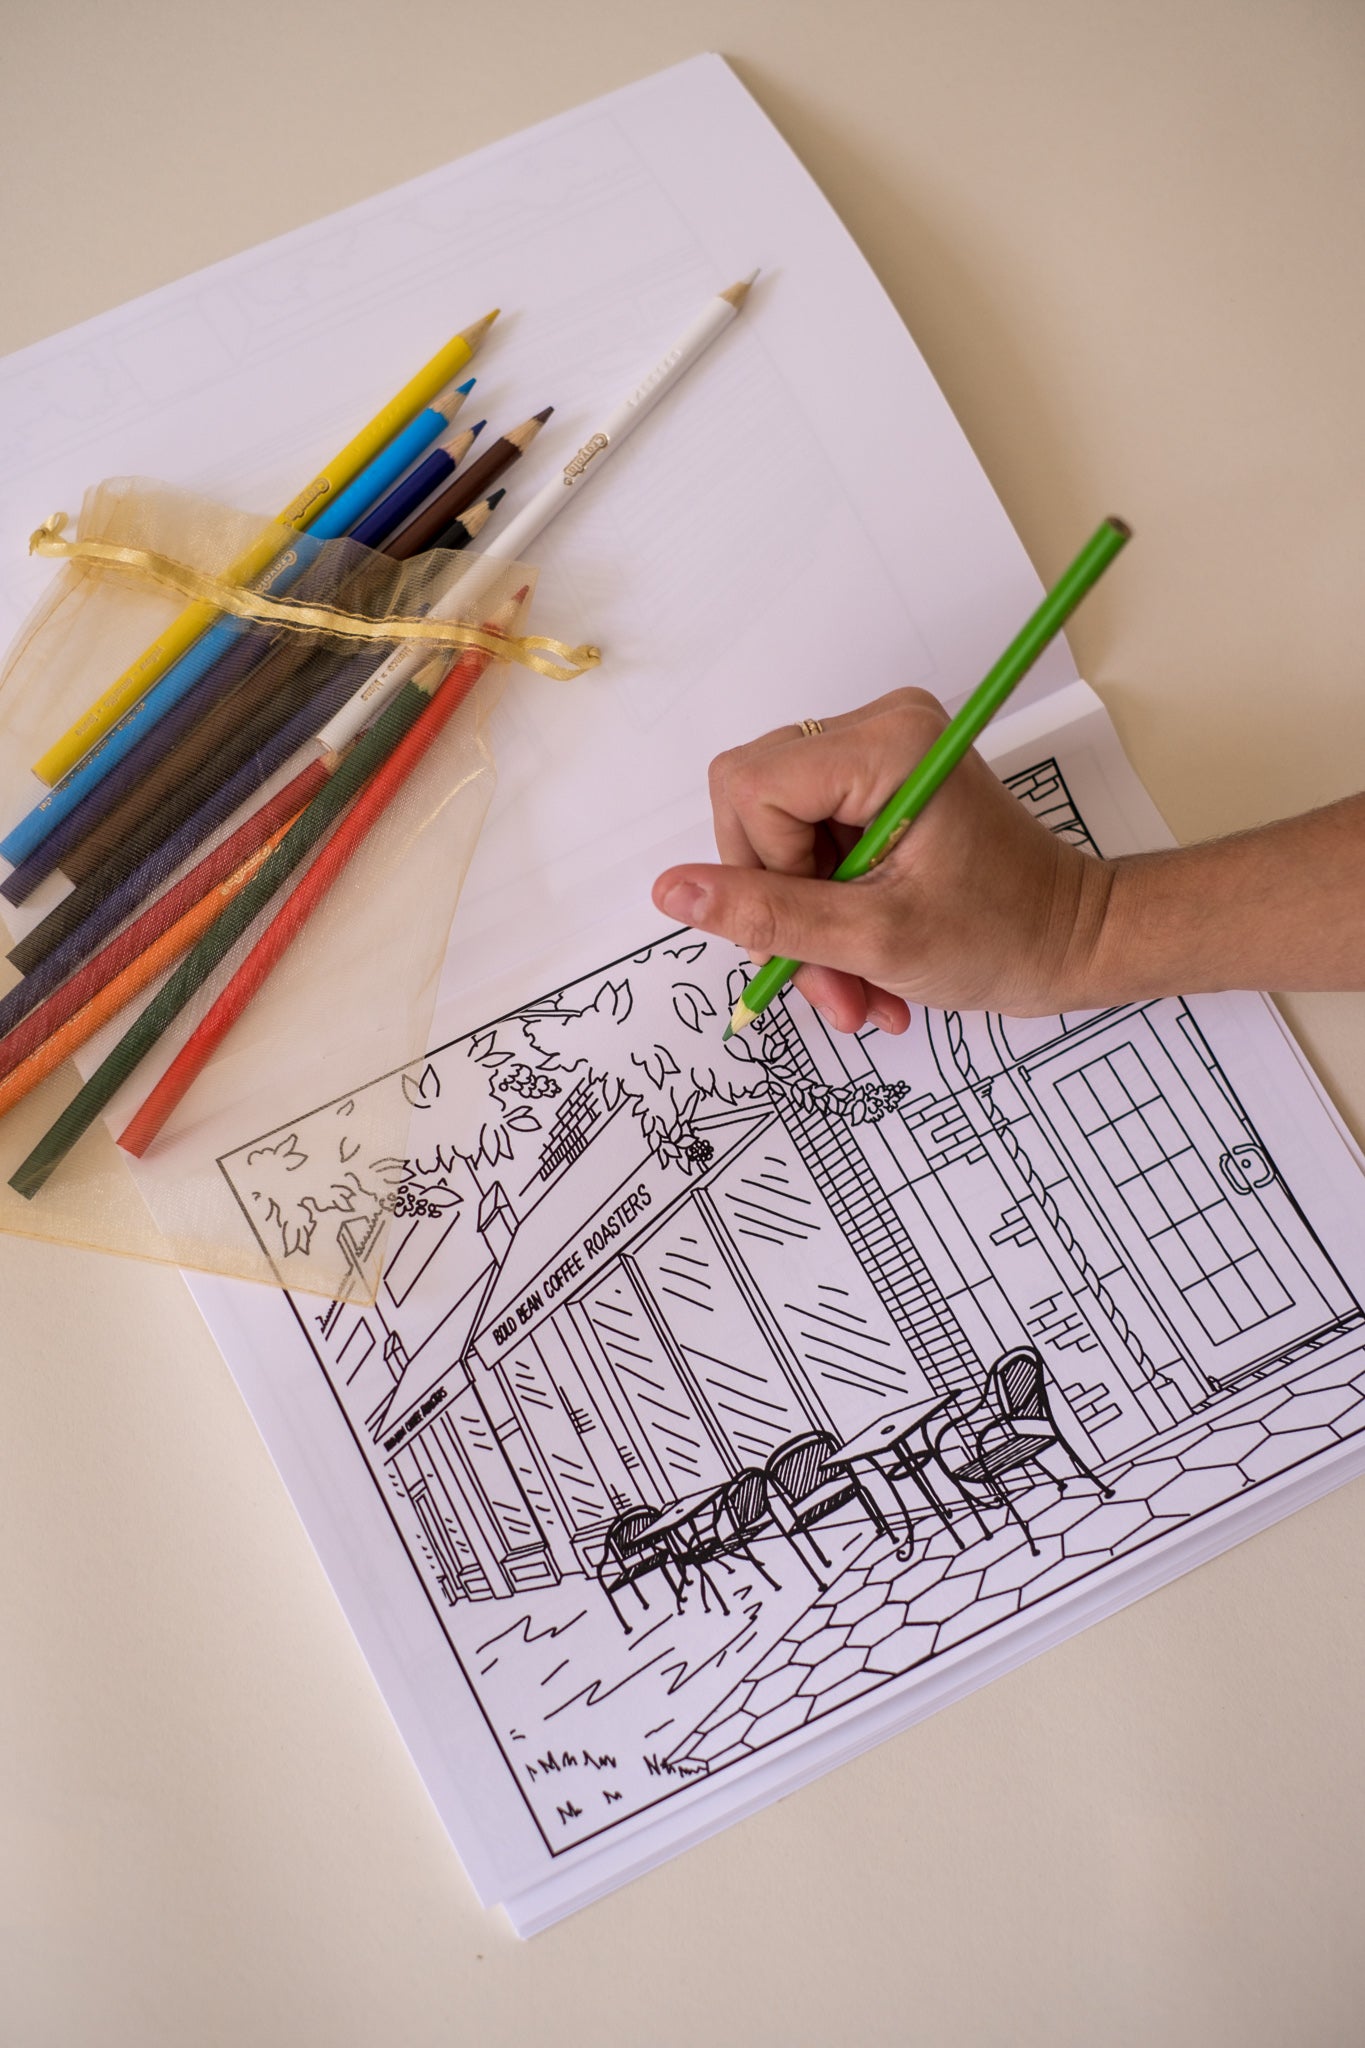 Welcome to Jacksonville: A Bold City Coloring Book + Colored Pencil Set